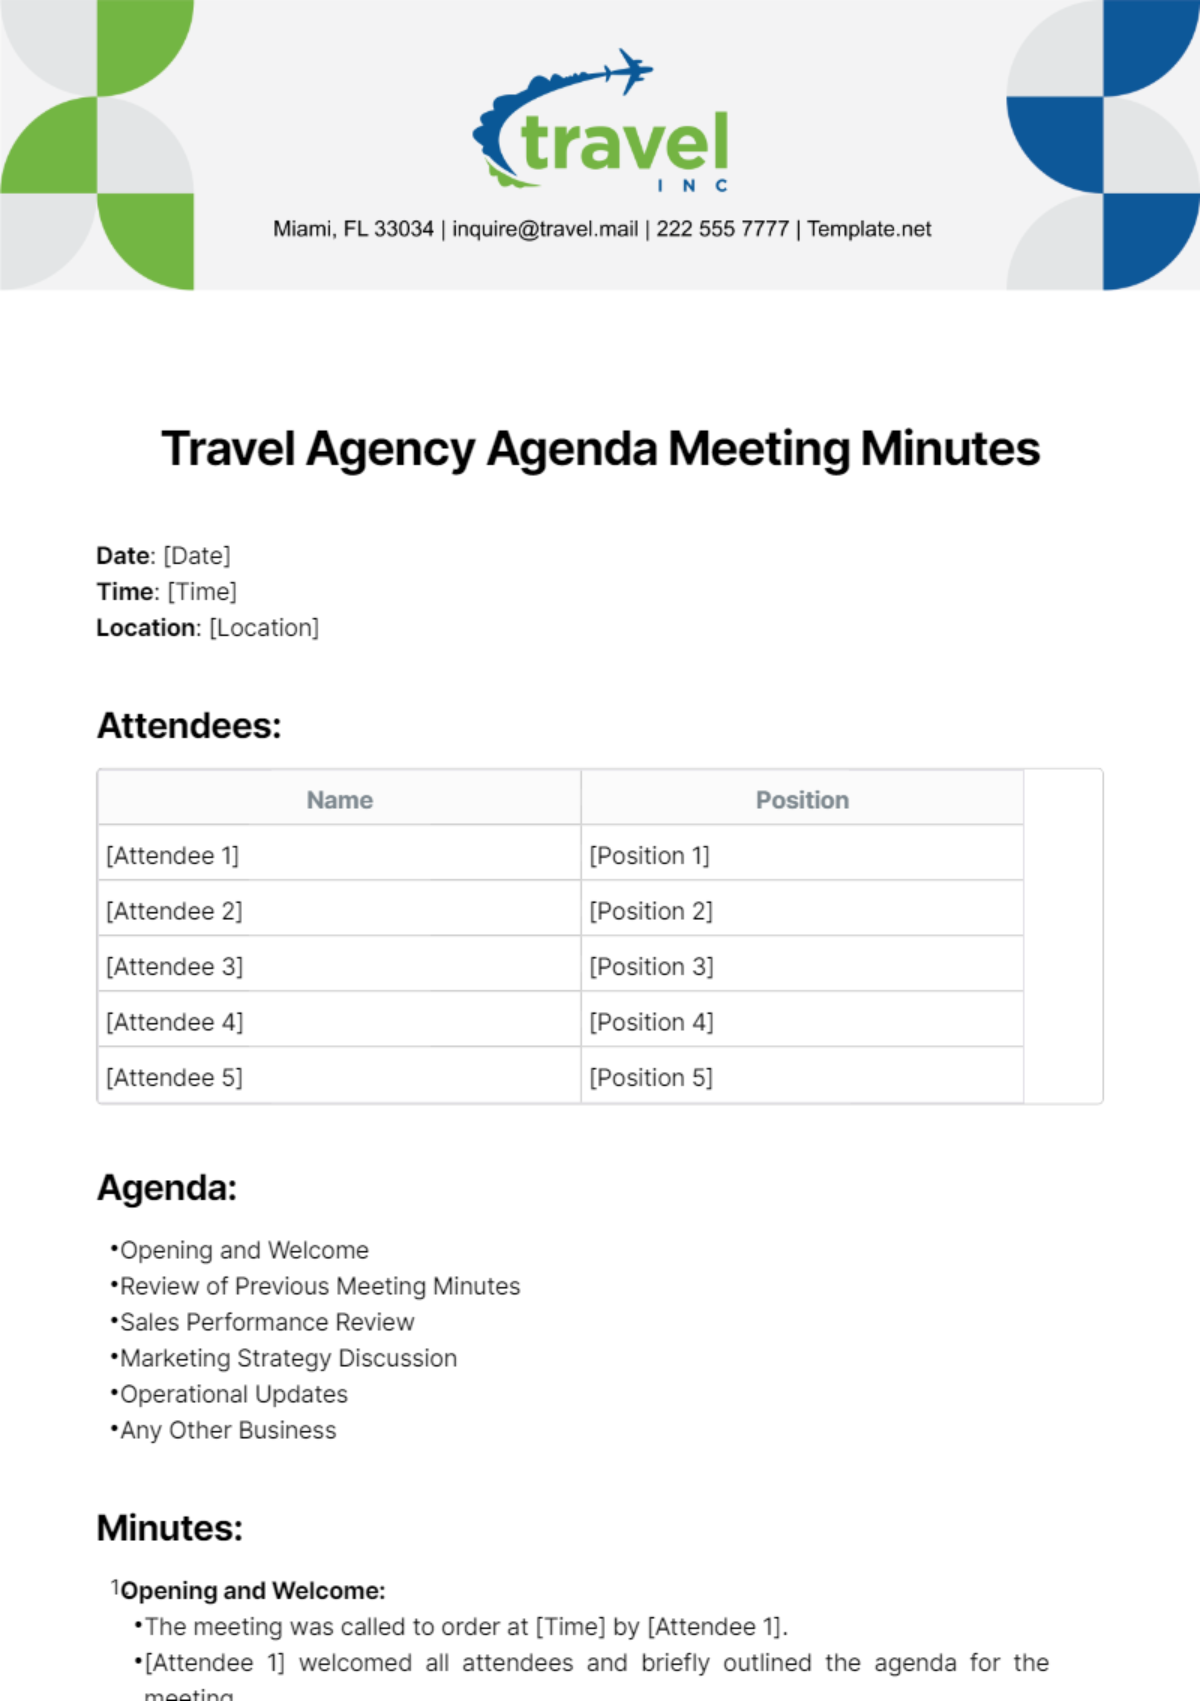 Free Travel Agency Agenda Meeting Minutes Template